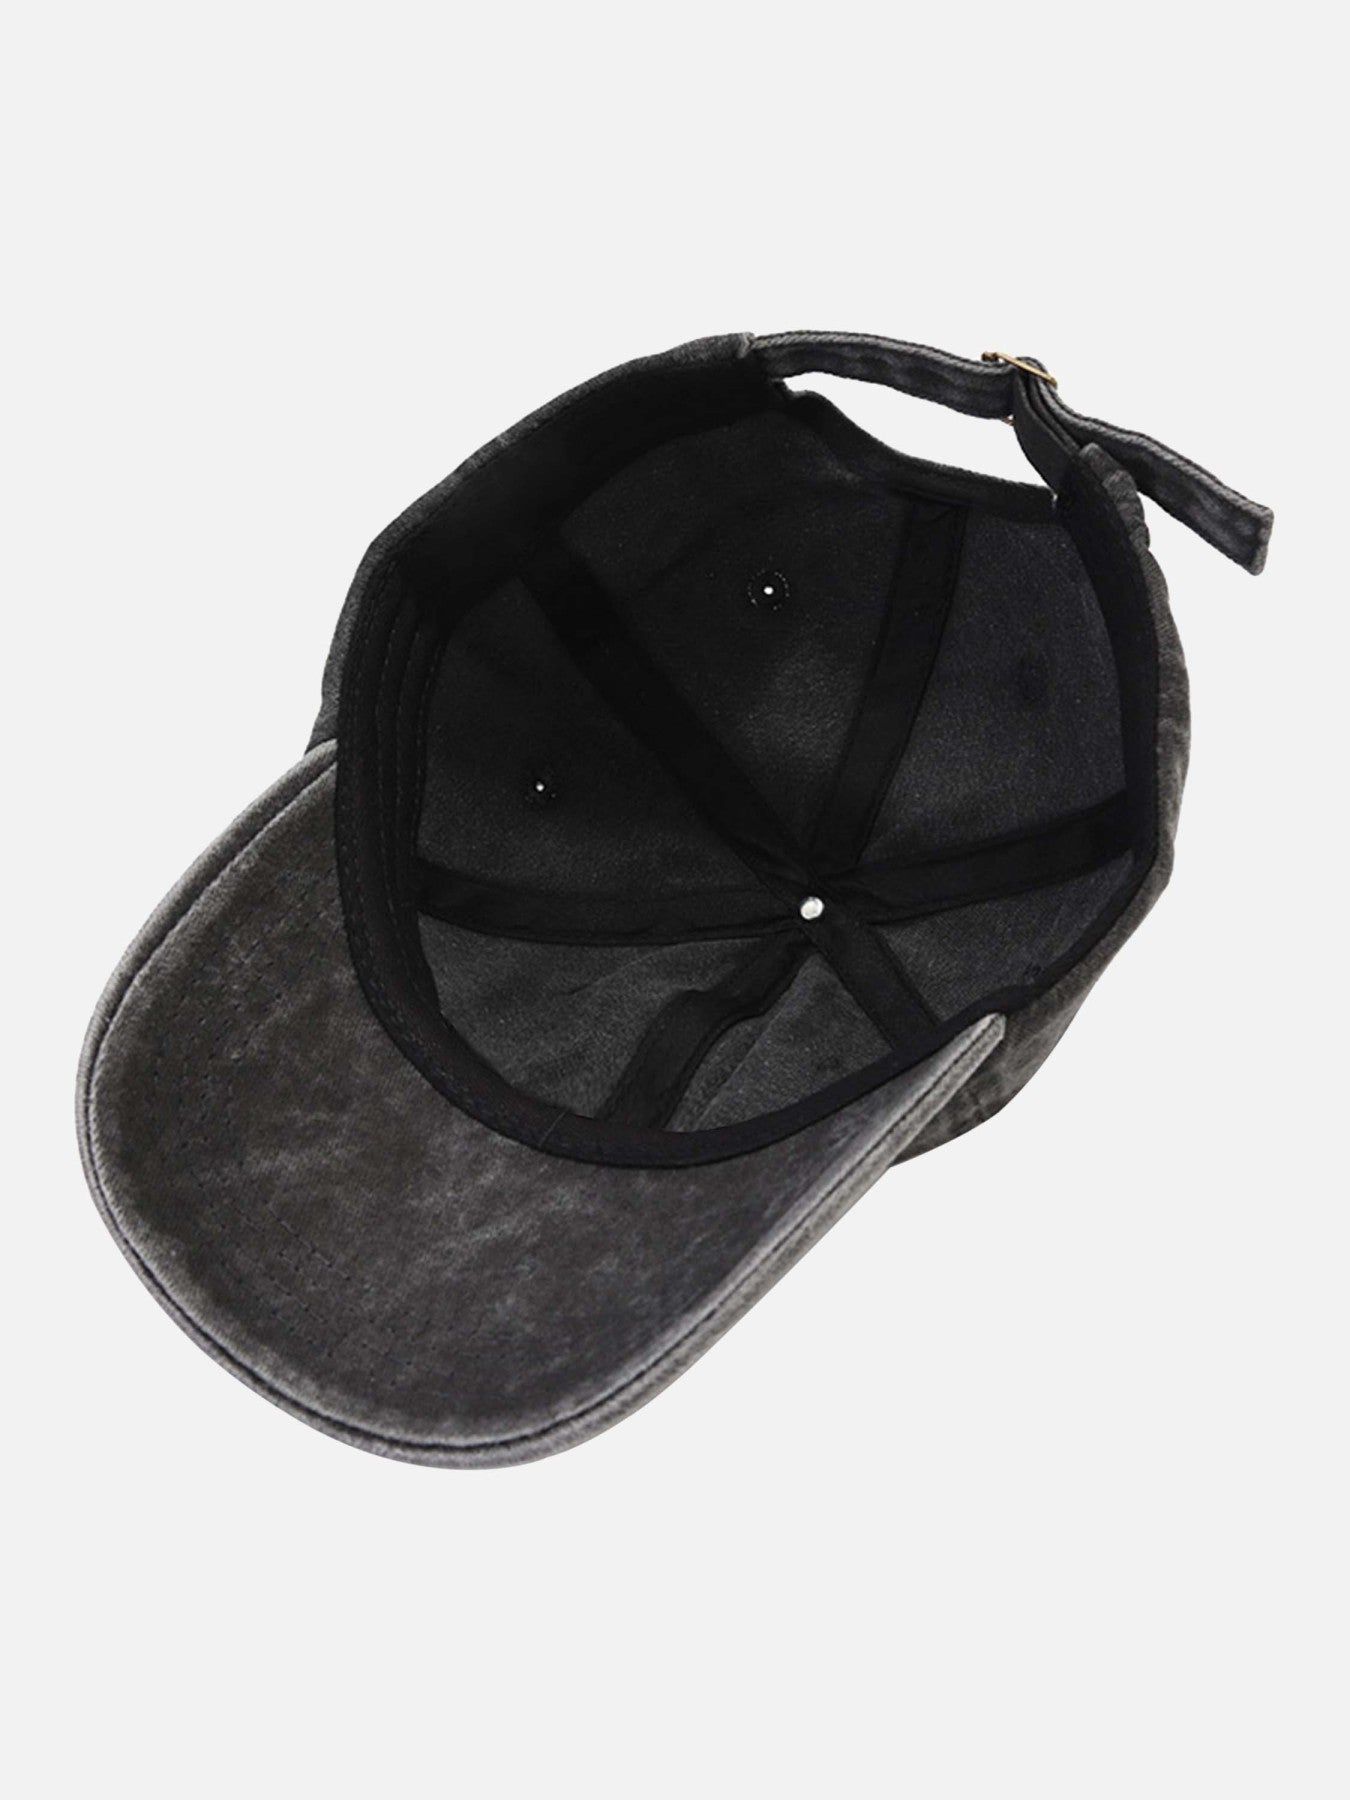 Thesupermade Cowboy Washed Old Duck Tongue Cap - 1625